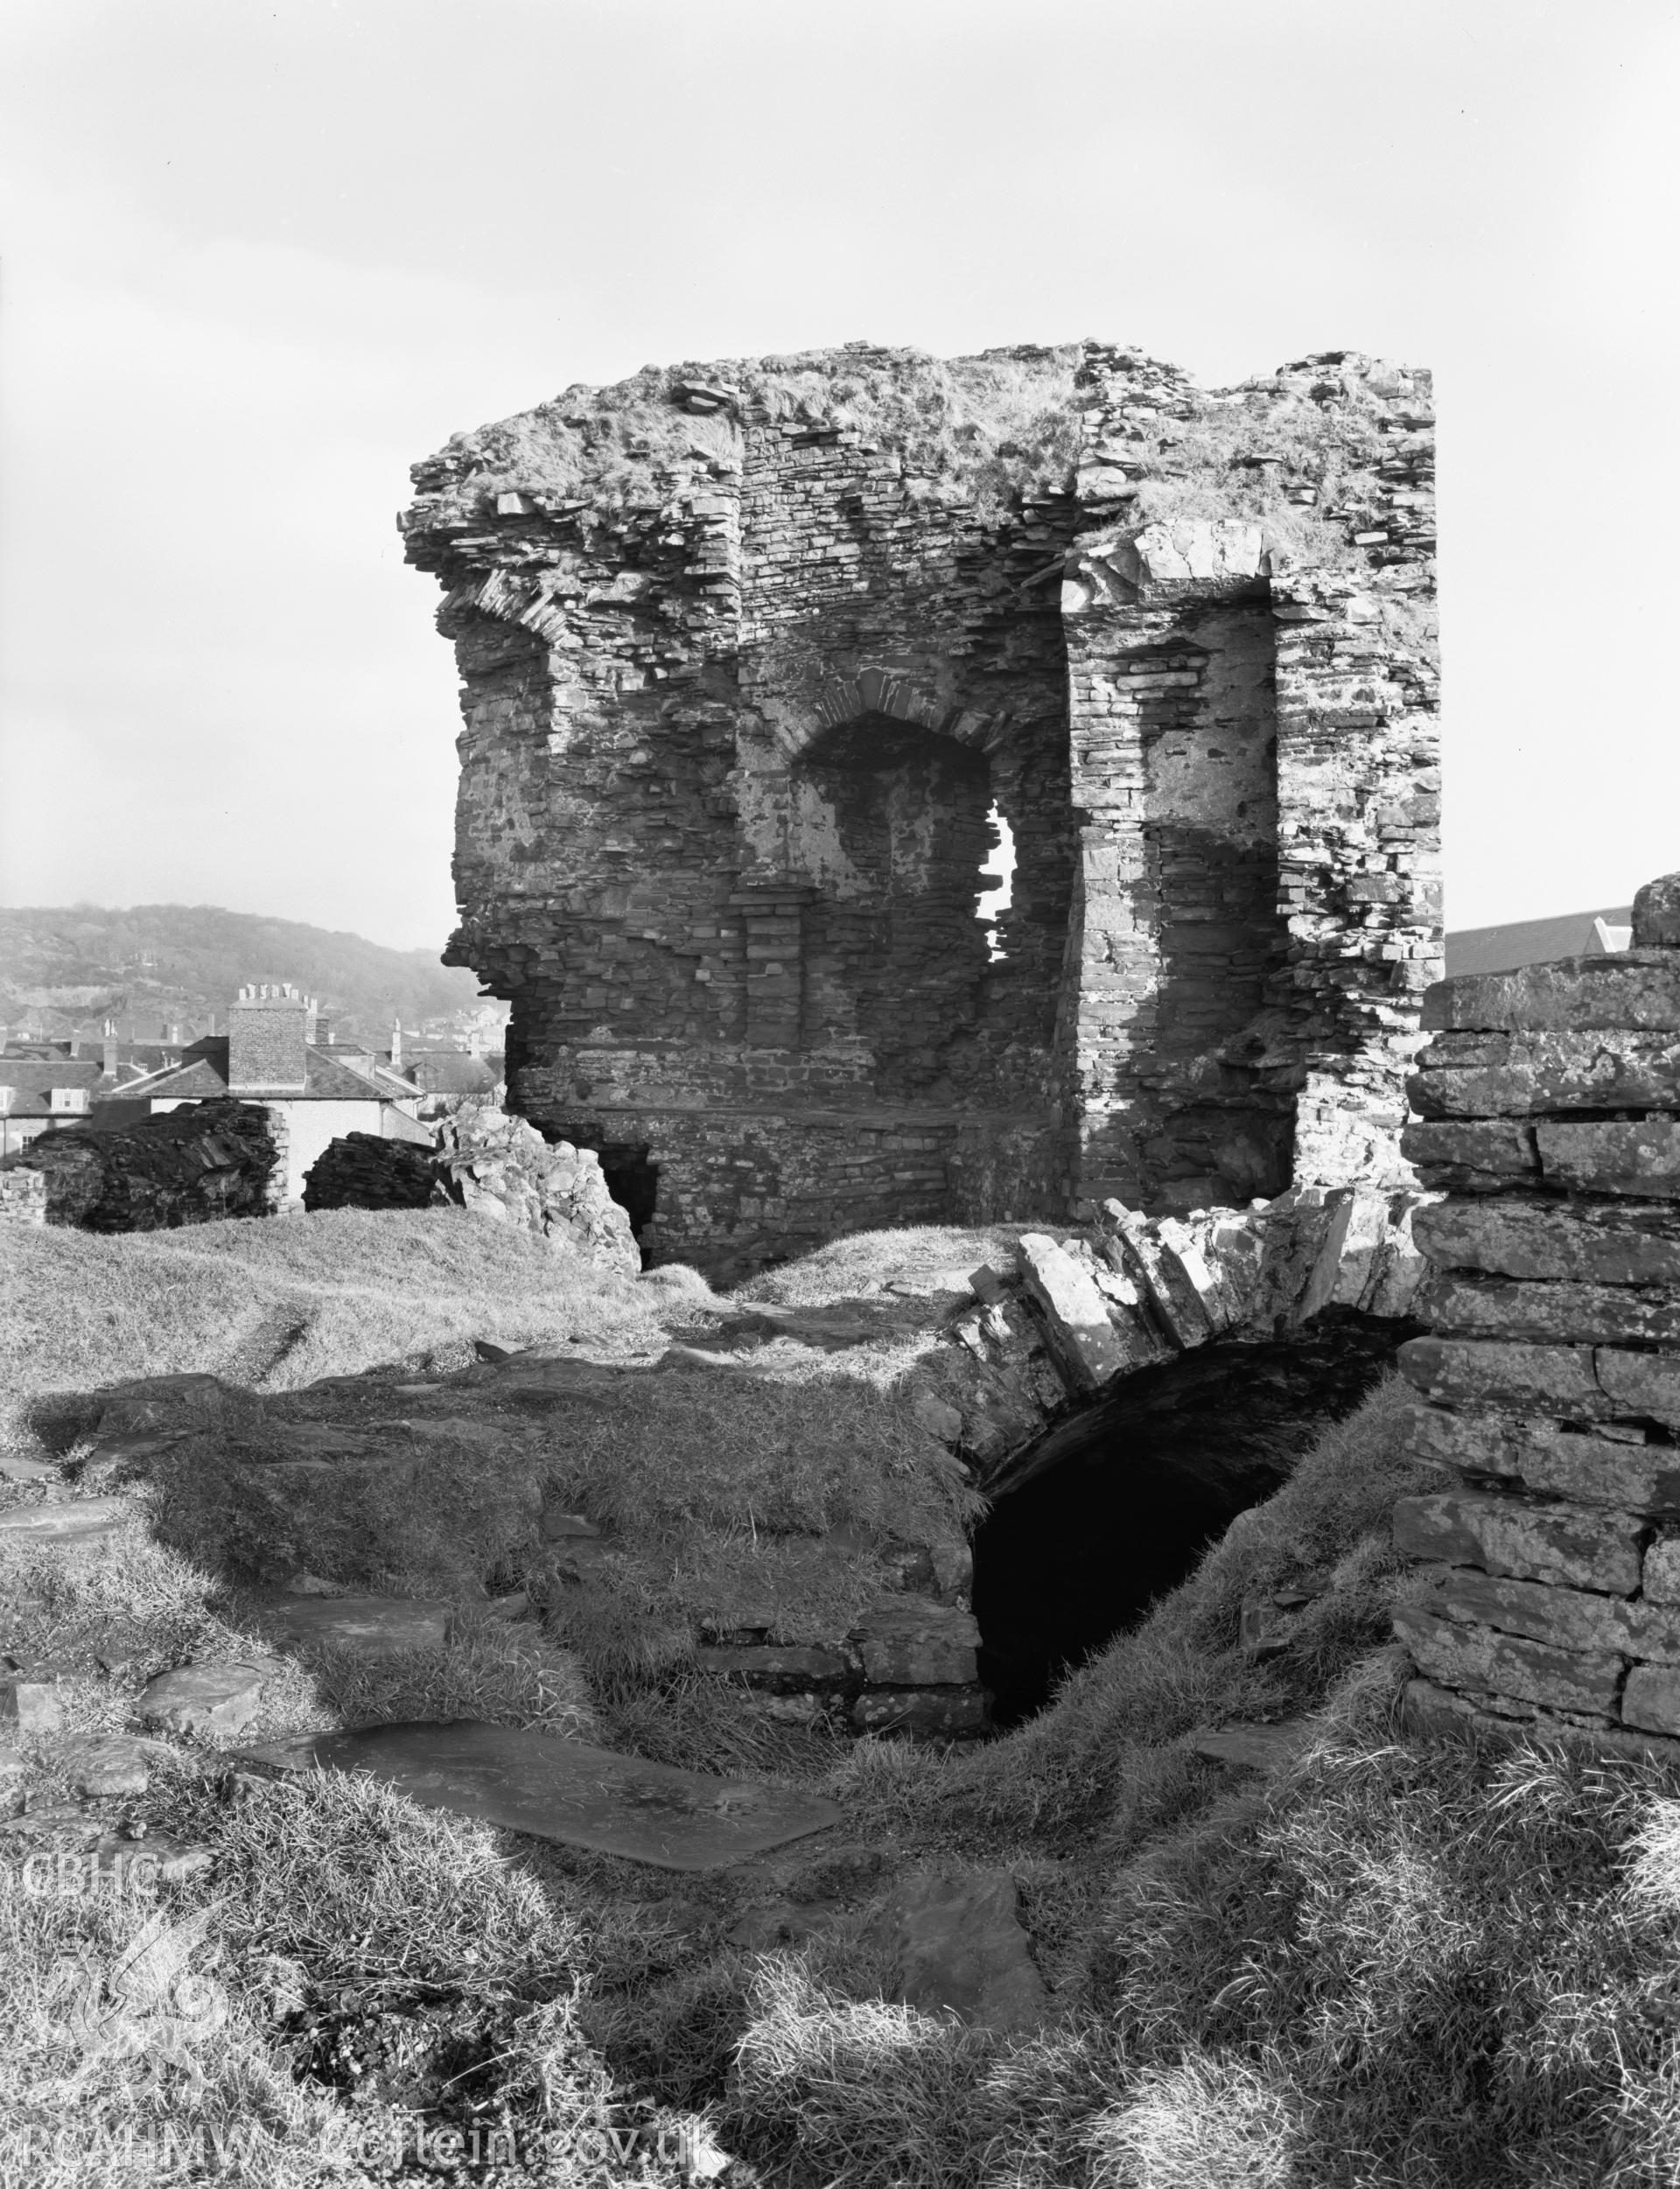 Landscape view of Aberystwyth Castle, part of gate house, taken 25.01.65.